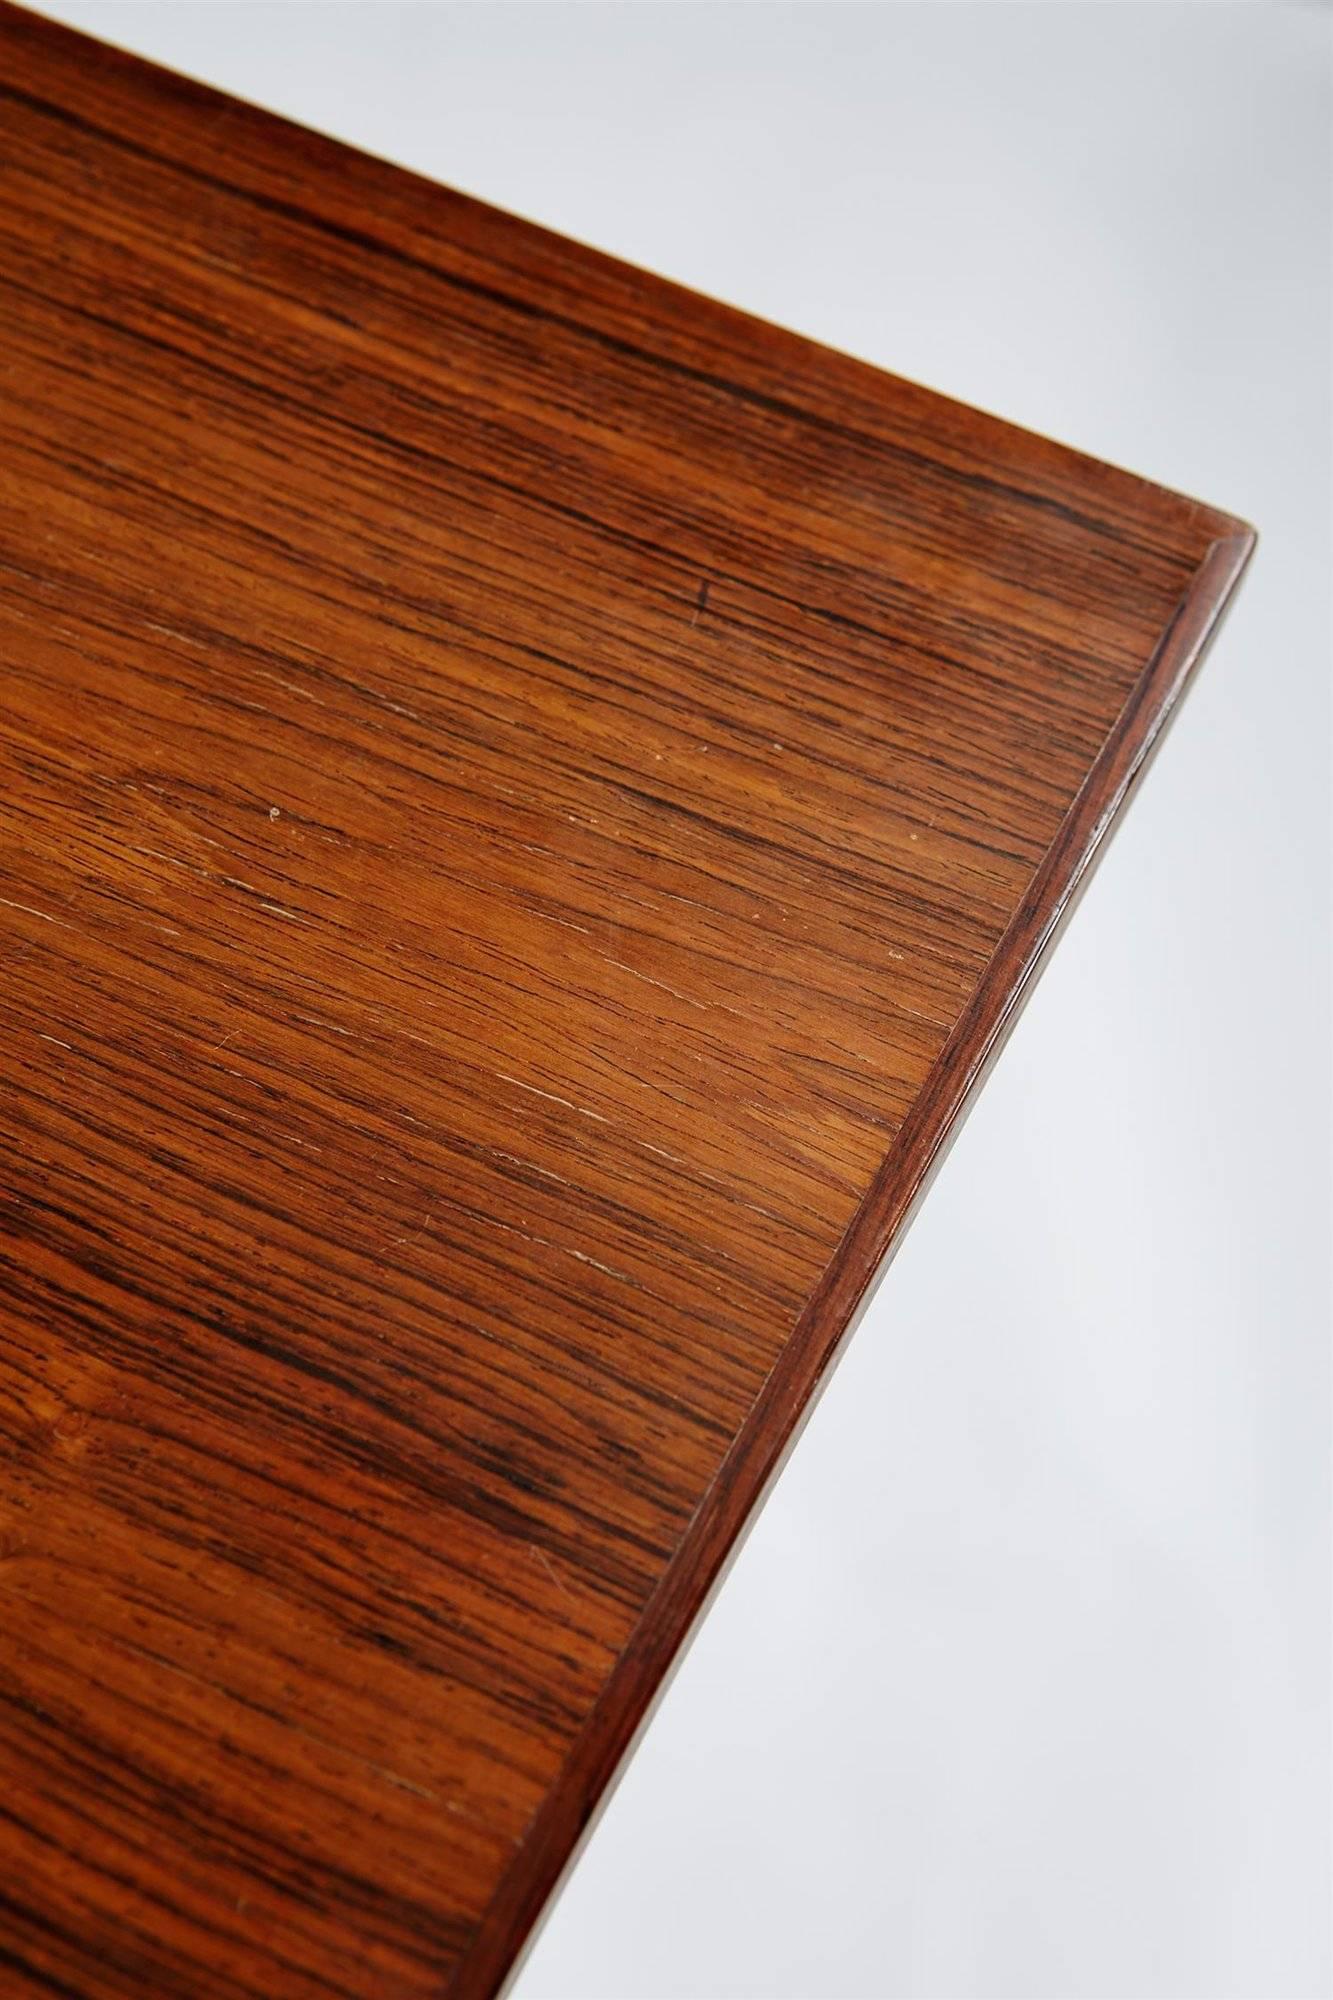 Mid-20th Century Wall Hung Table Designed by Helge Vestergaard Jensen, Denmark, 1950s For Sale